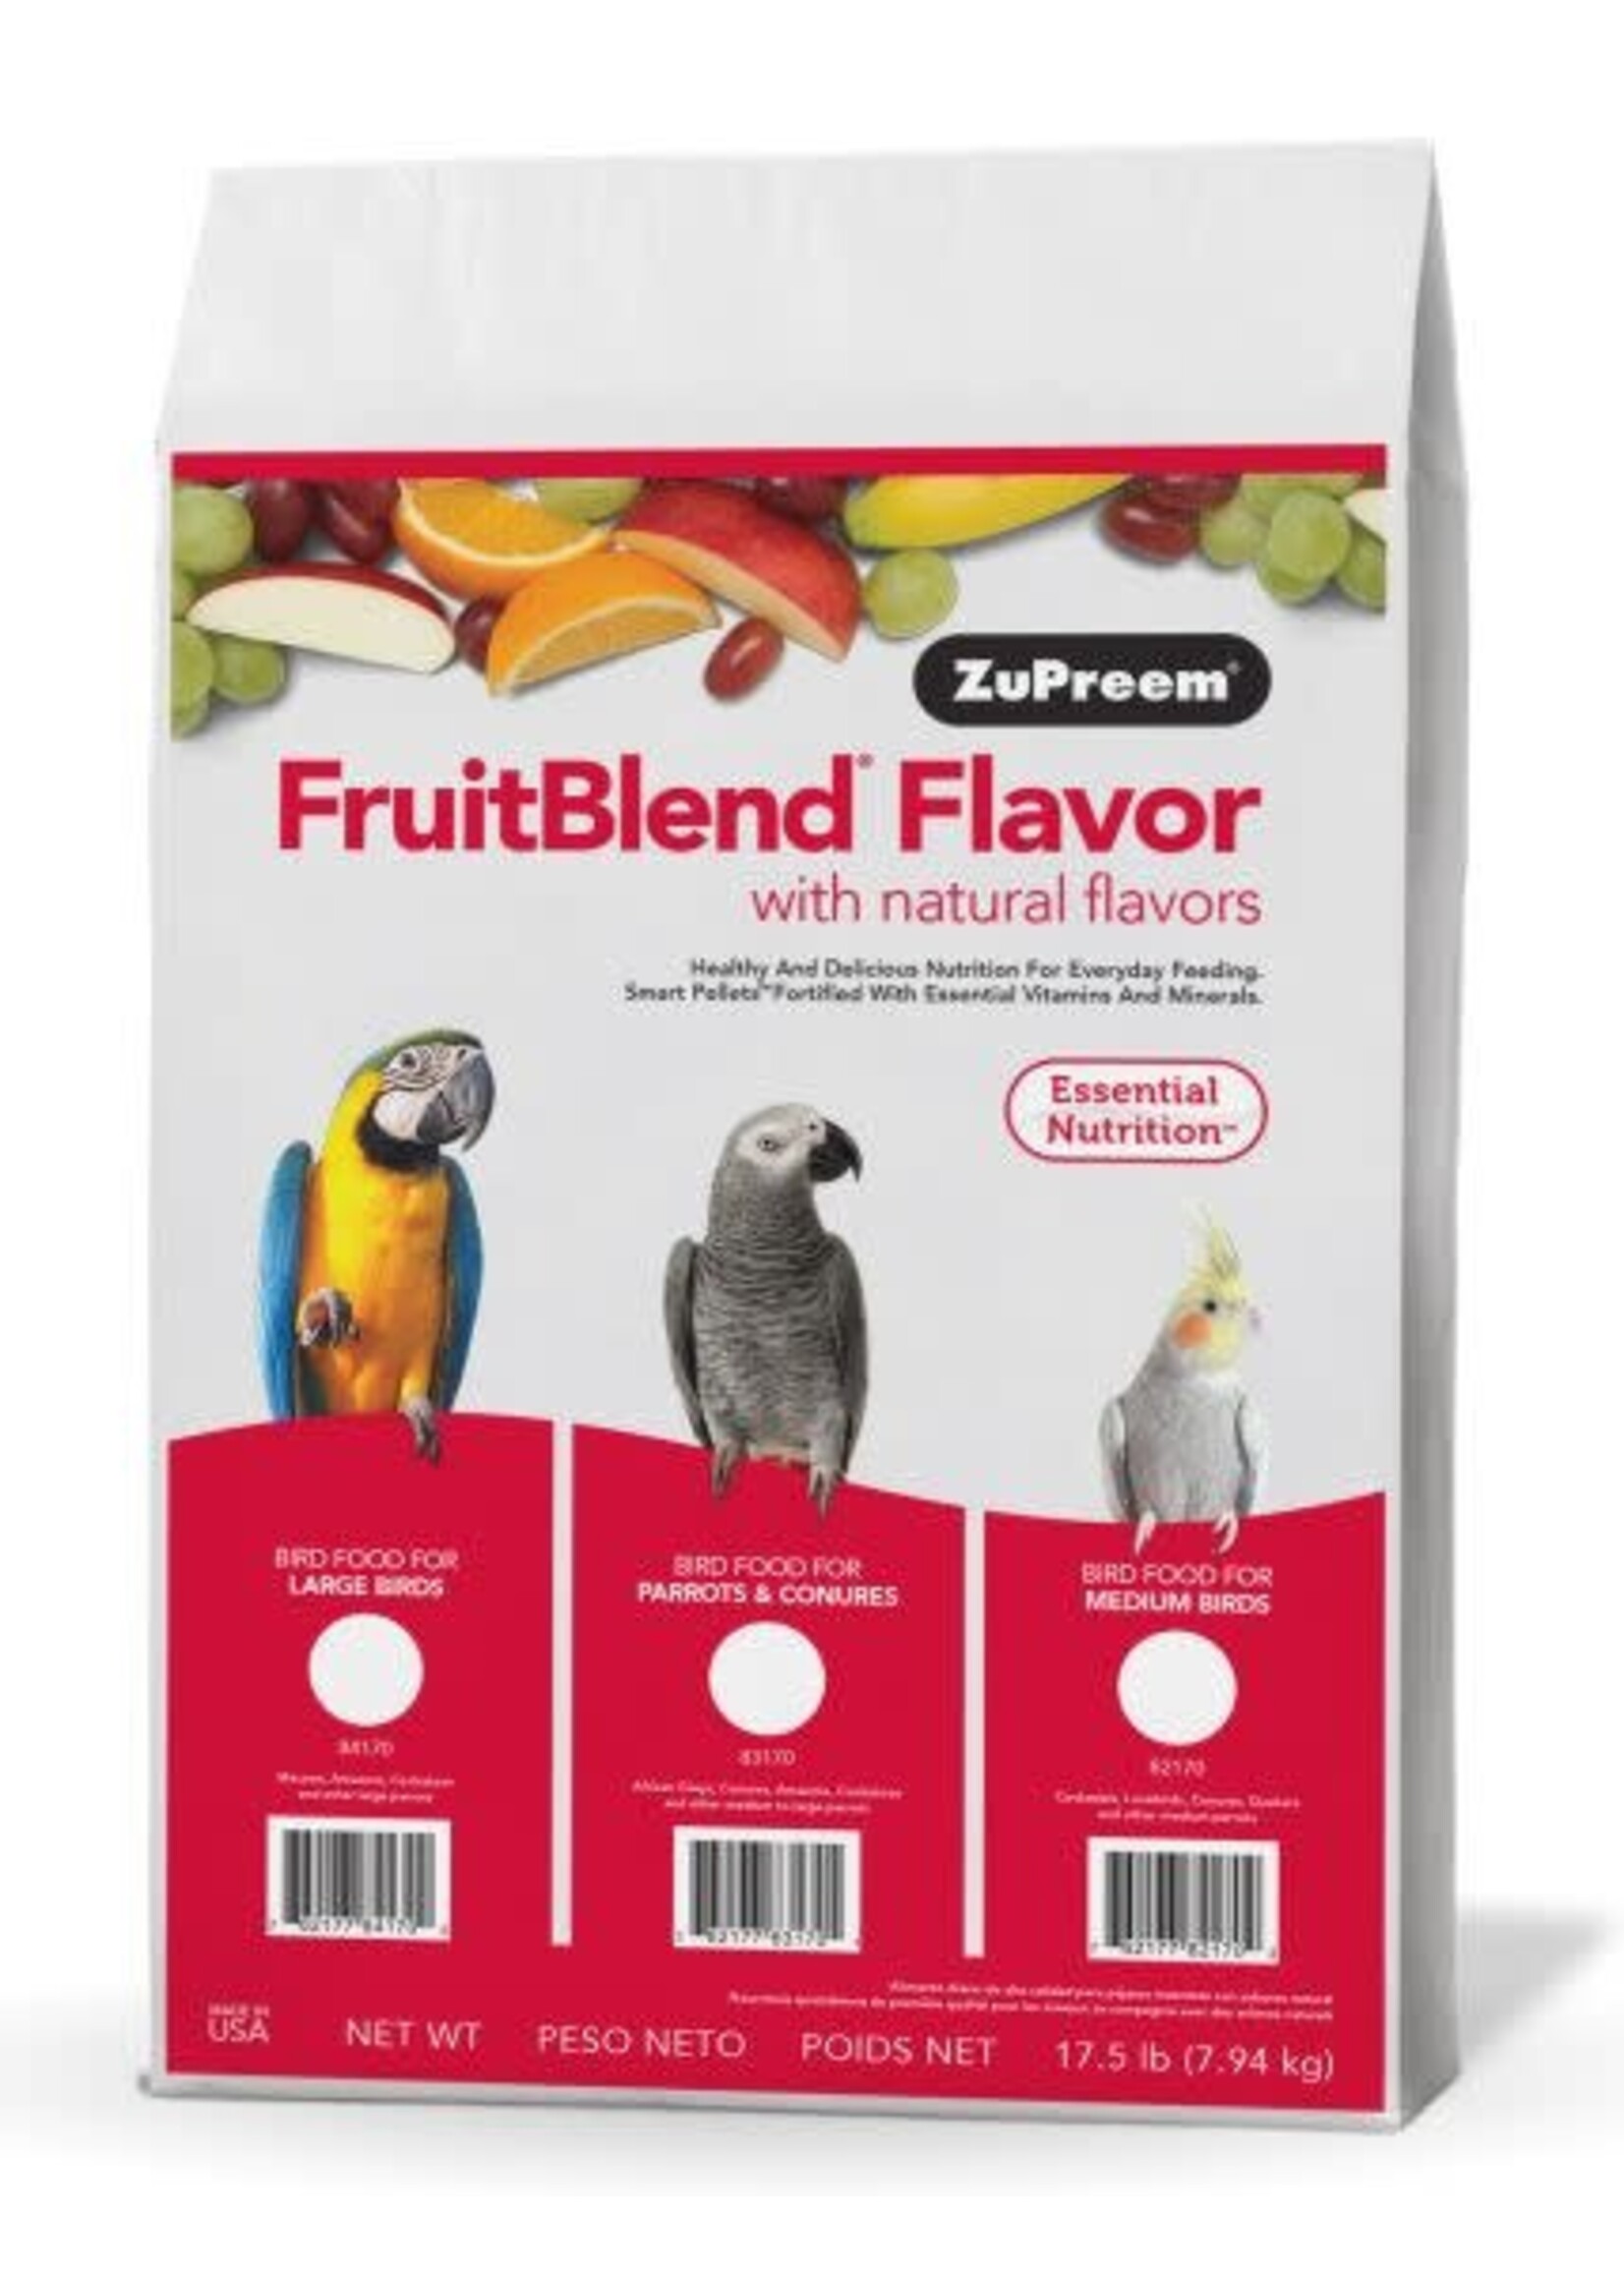 Zupreem ZuPreem "Fruitblend" Food For Parrots & Conures 17.5lbs 83170